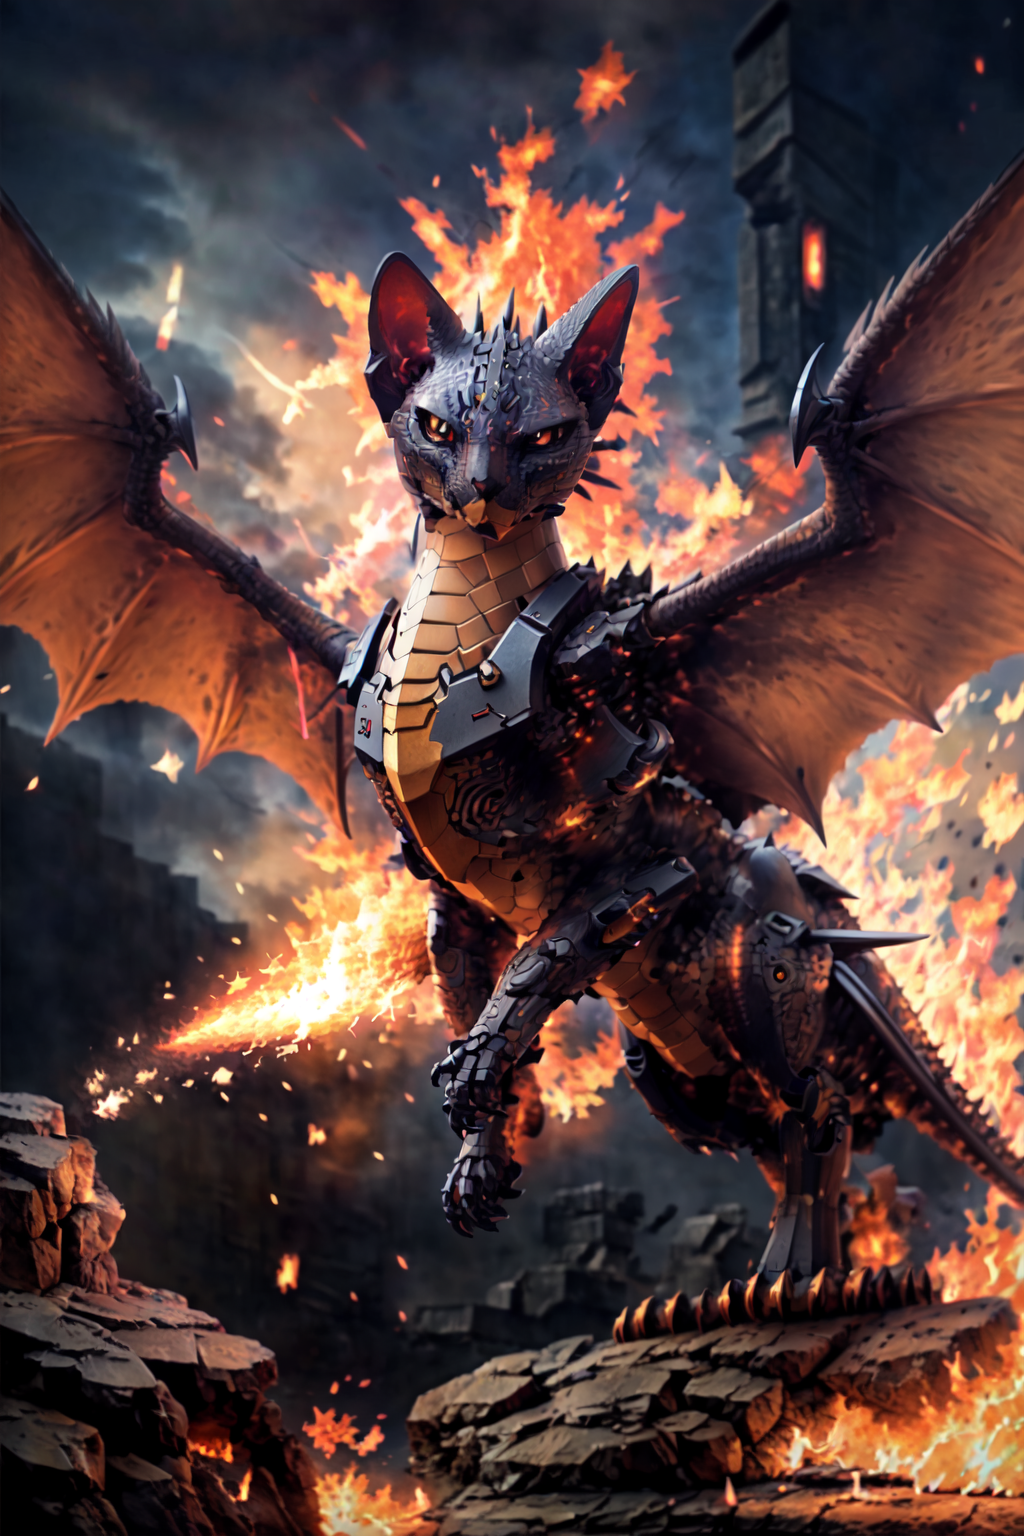 A robotic dragon with glowing eyes and flames in the background.